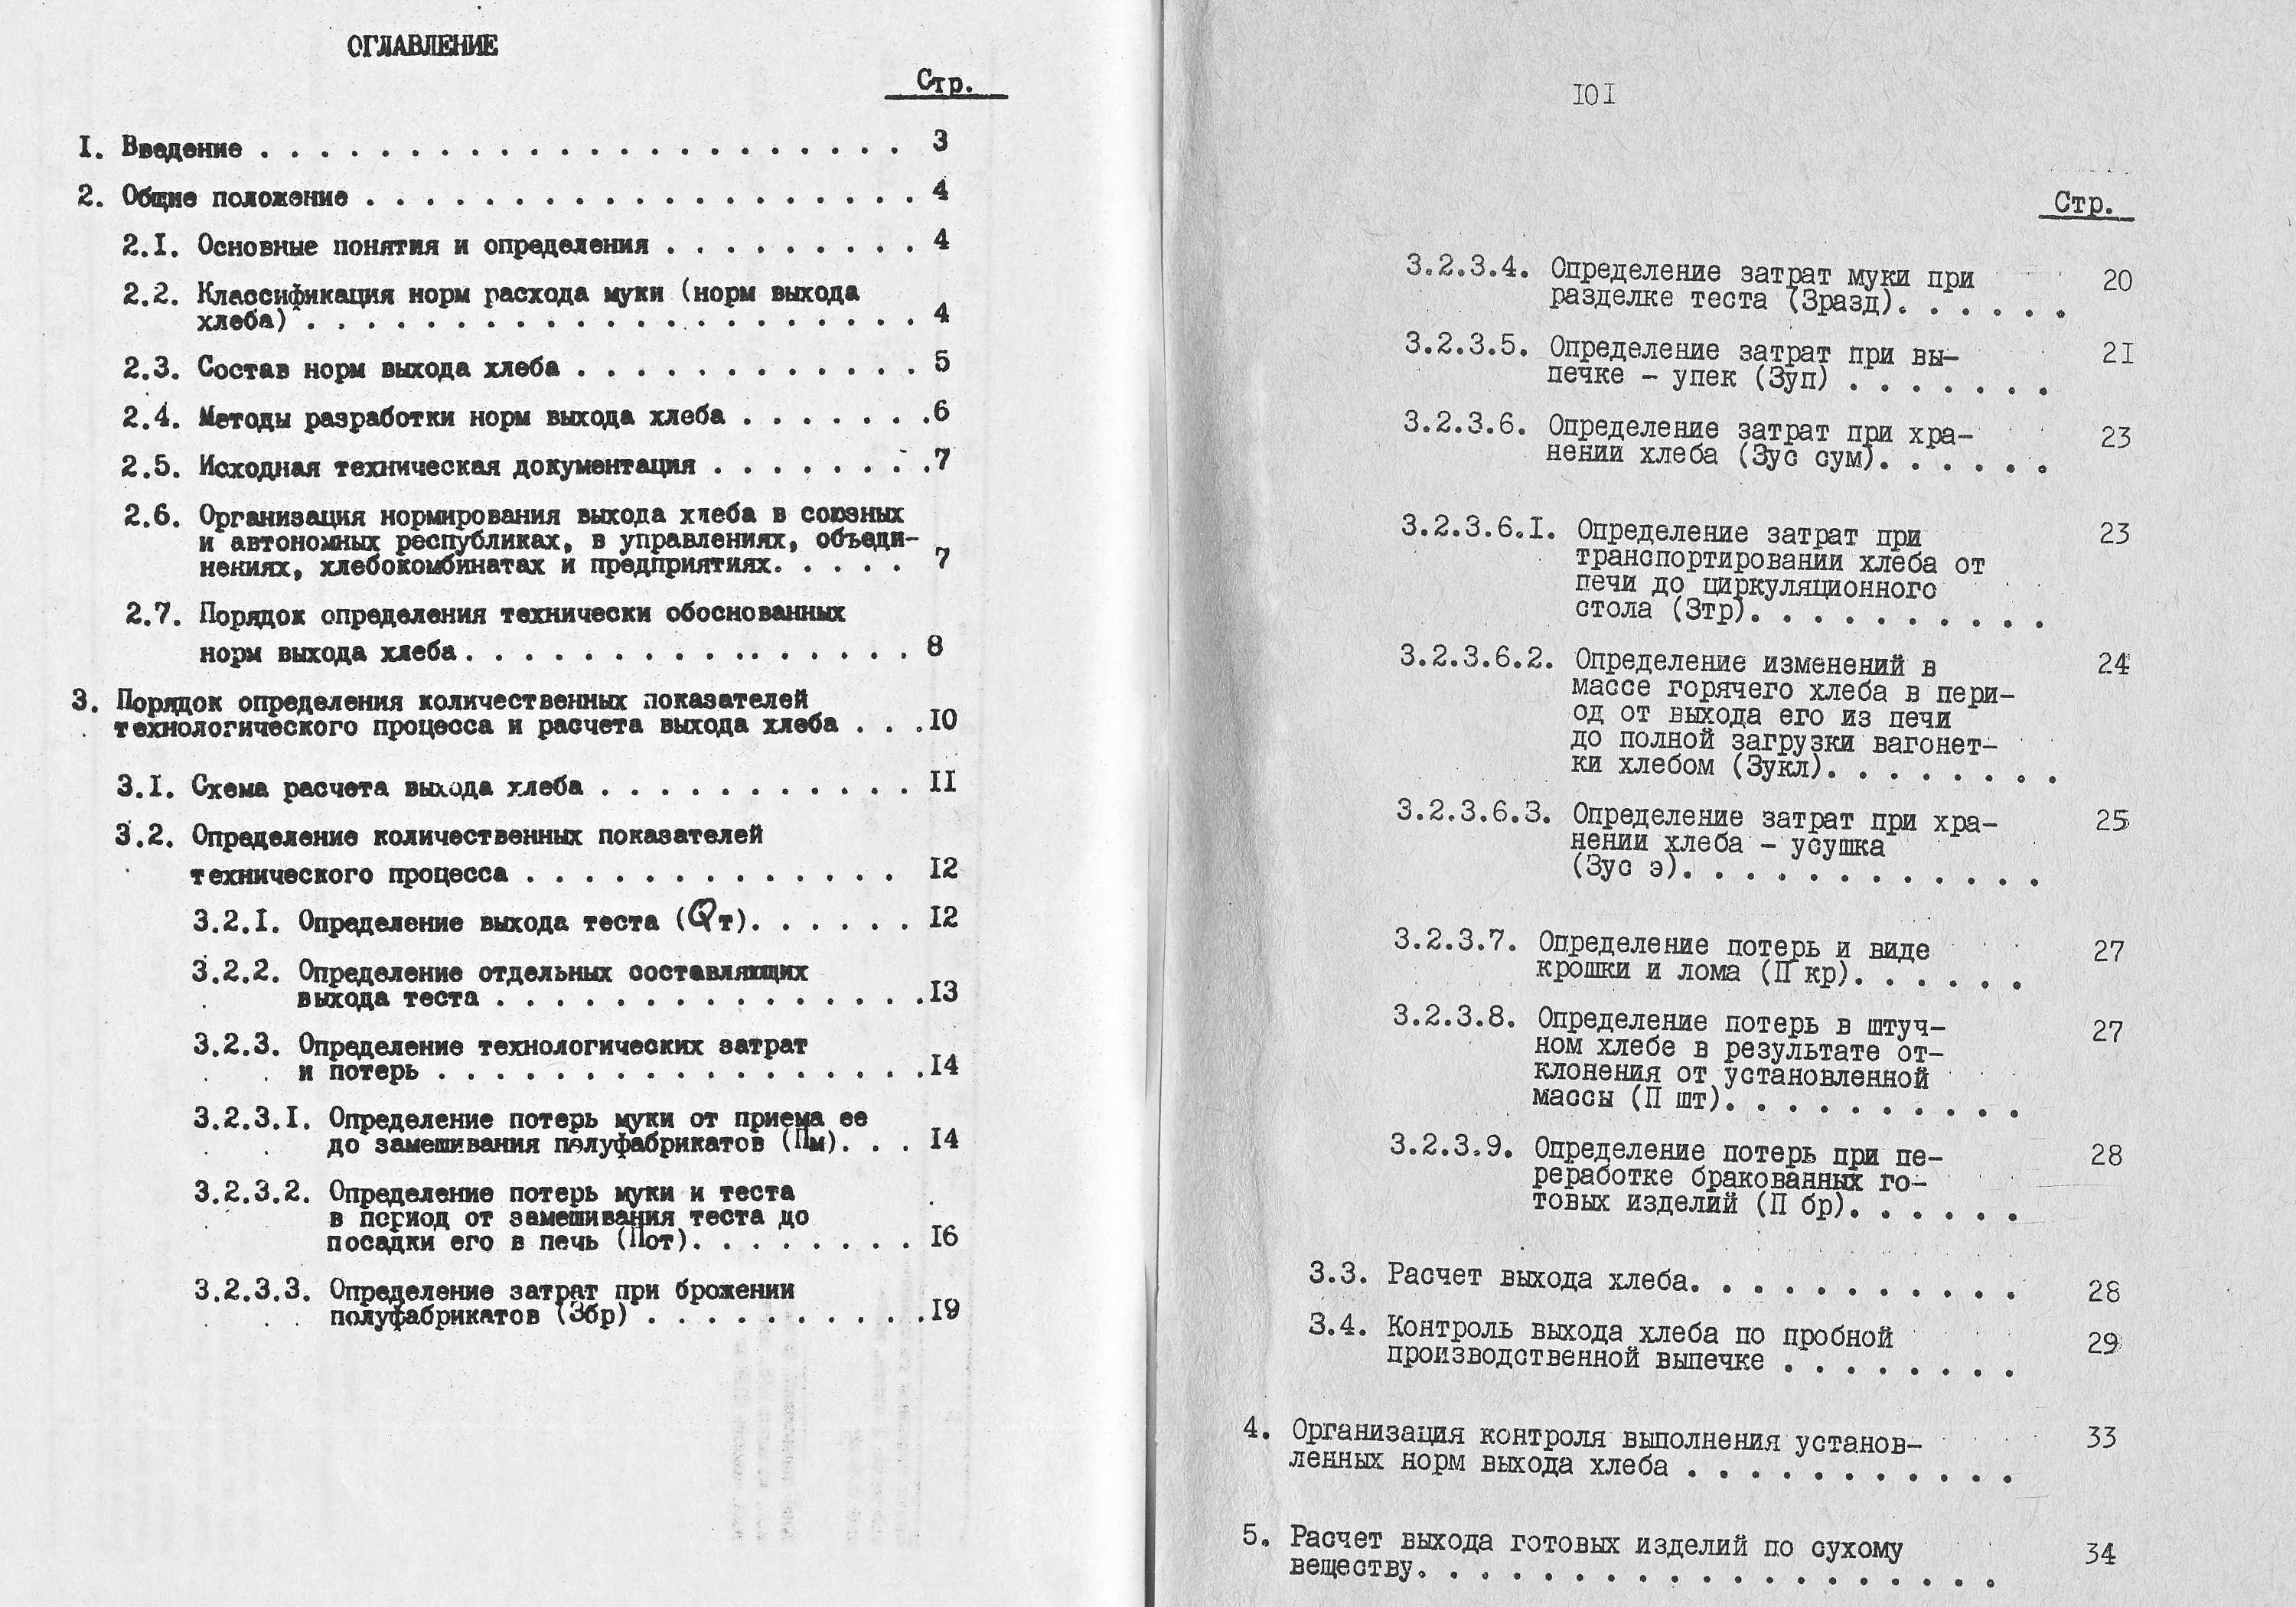 Instructions for the rationing of flour consumption (bread yield) in the baking industry 1984  pages 100‒101